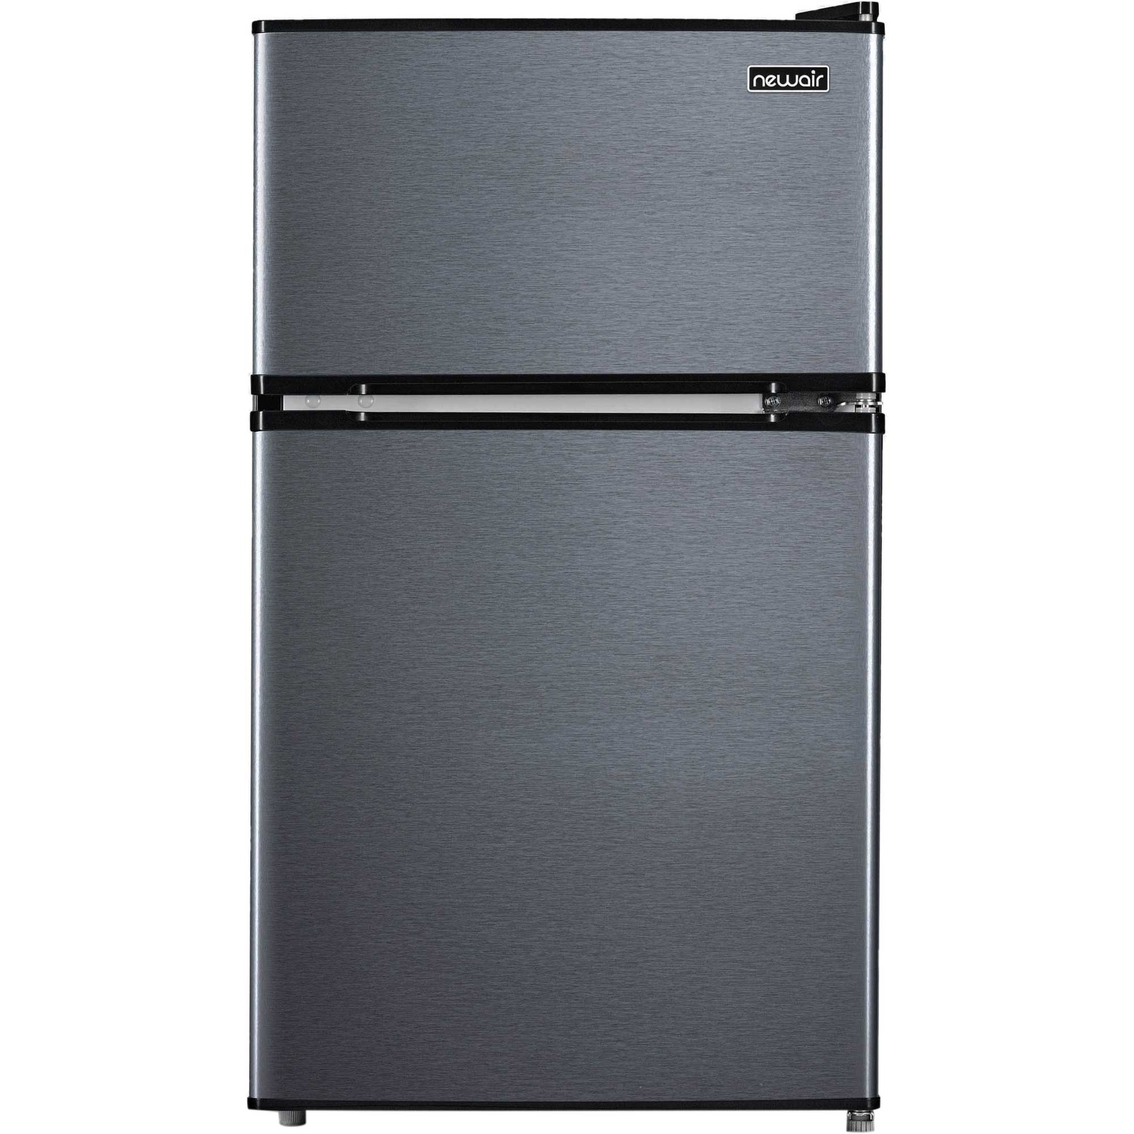 Military/Veterans: $212.00 Sale on New Air LLC 3.1 cu. ft. Compact Refrigerator